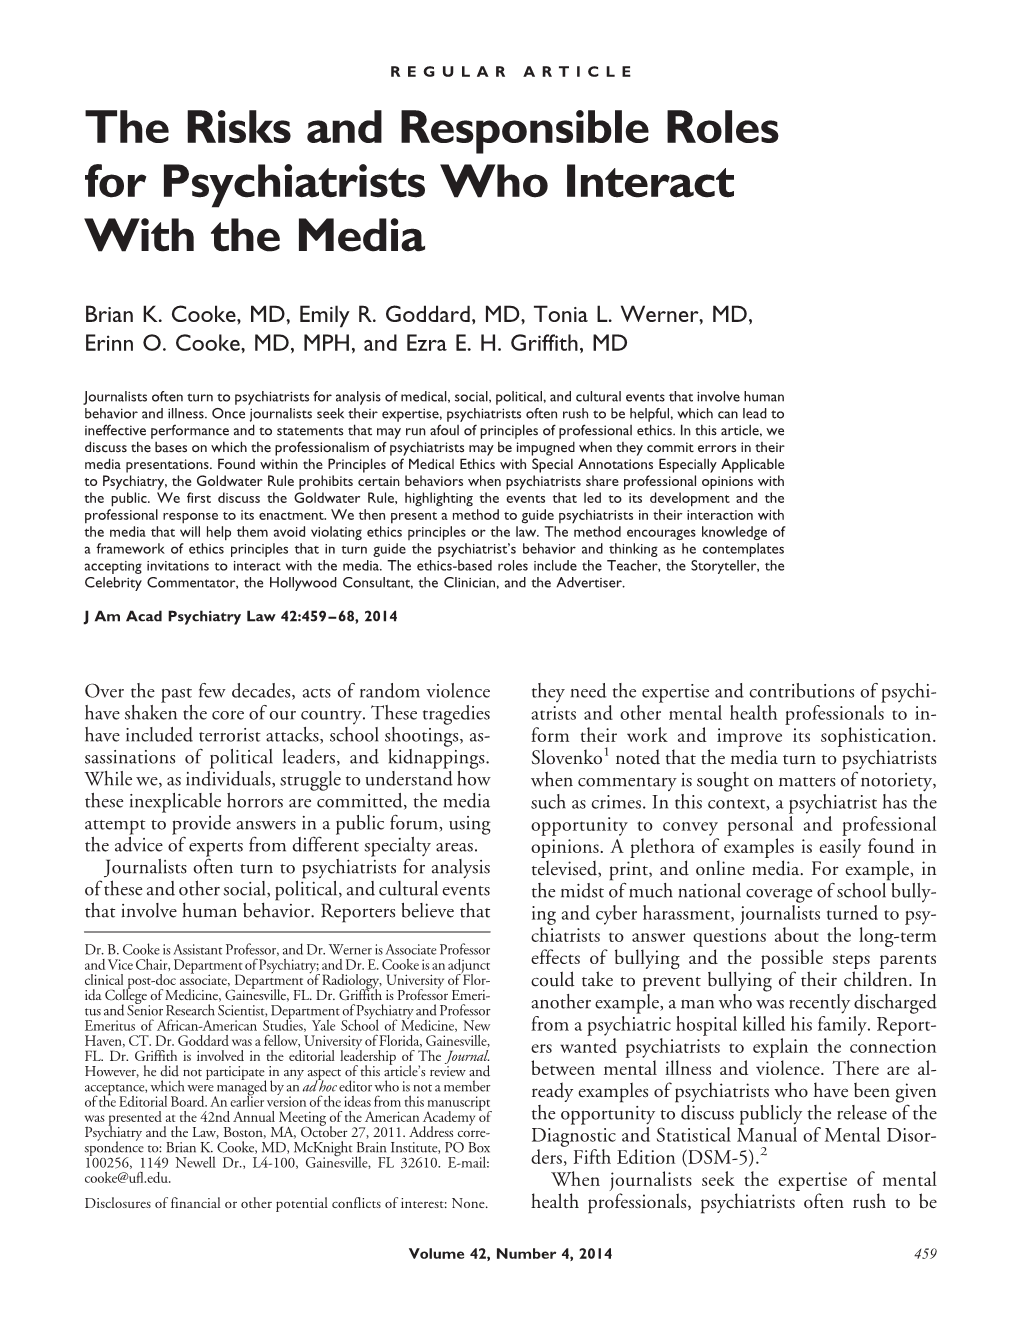 The Risks and Responsible Roles for Psychiatrists Who Interact with the Media